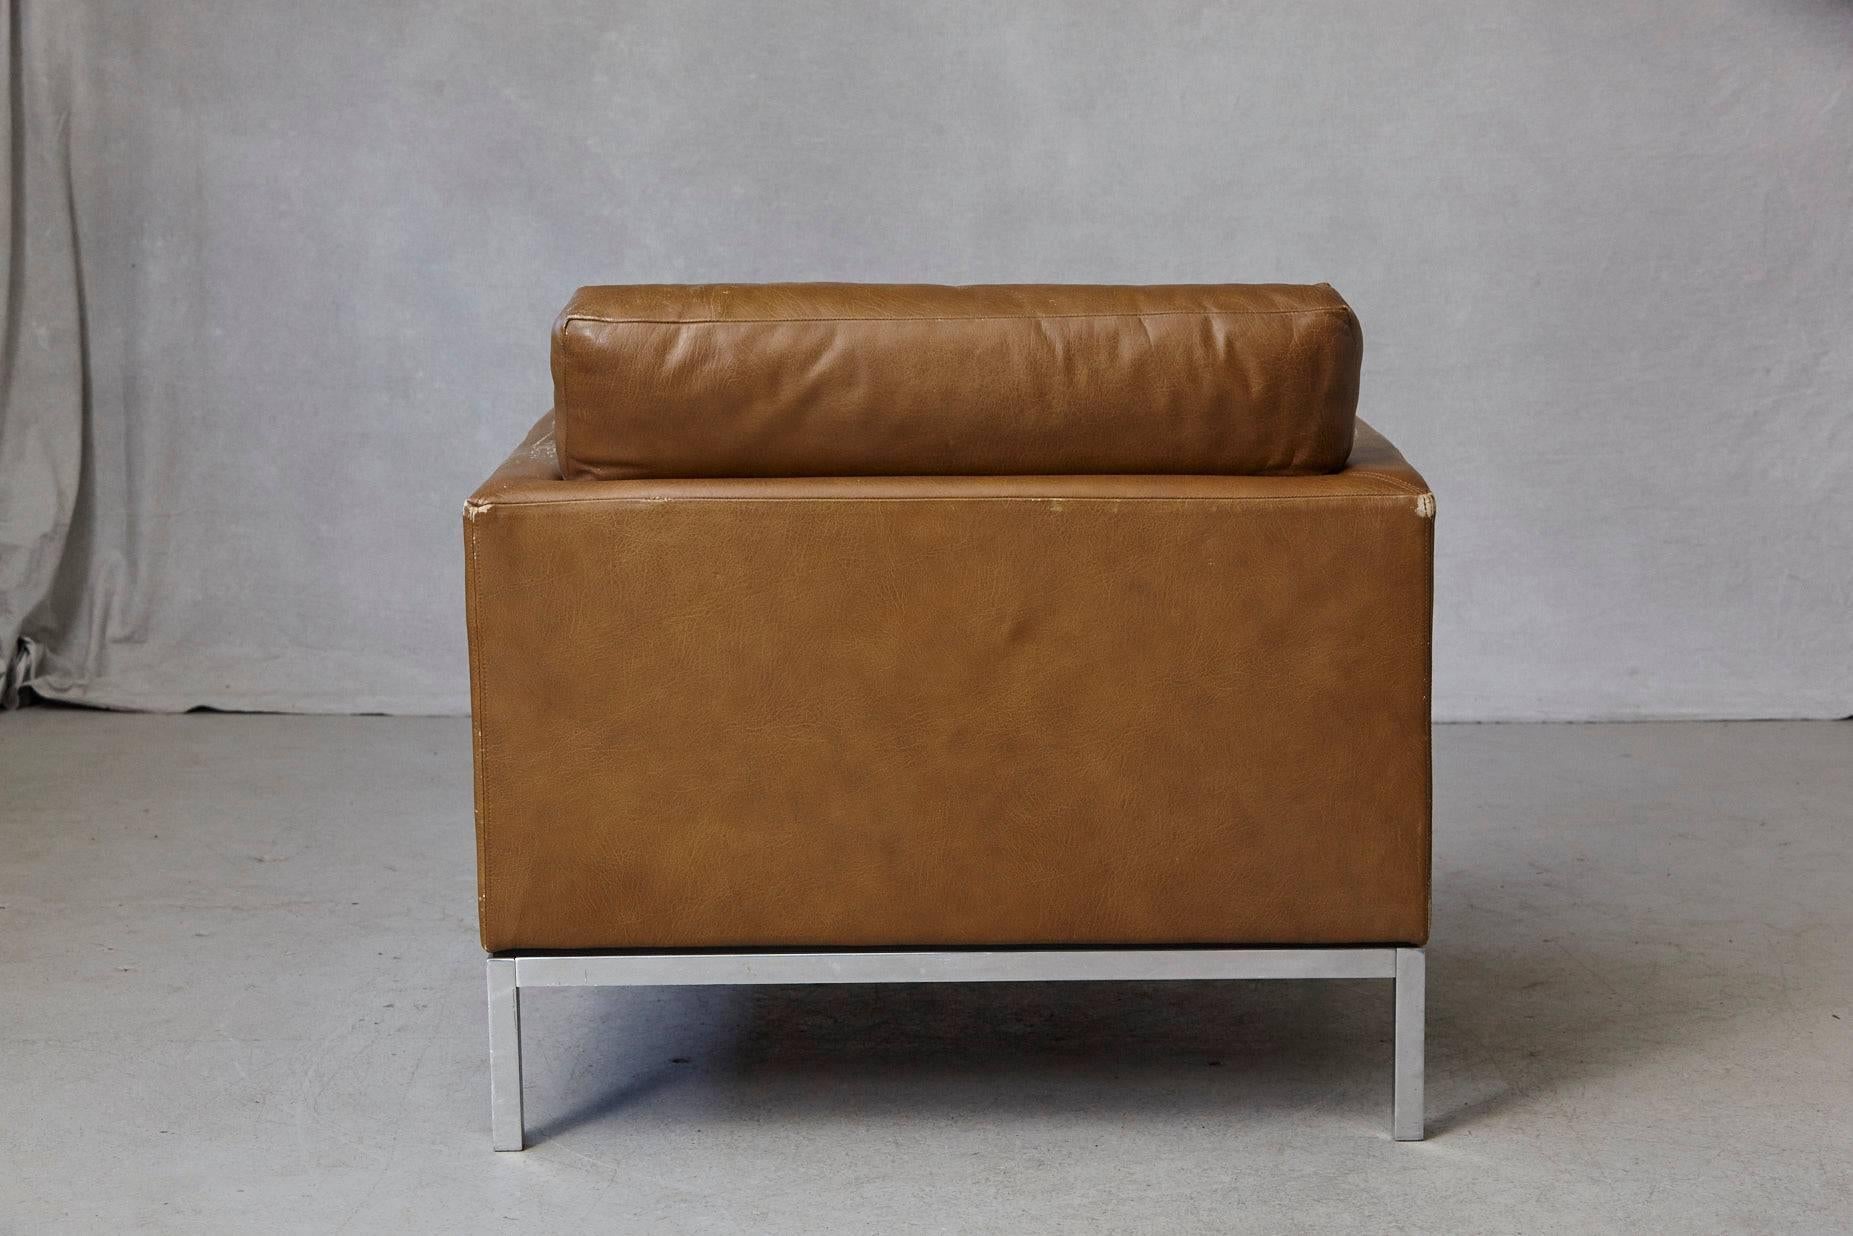 Steel Florence Knoll Tan Leather Button Tufted Lounge Chair, 1970s For Sale